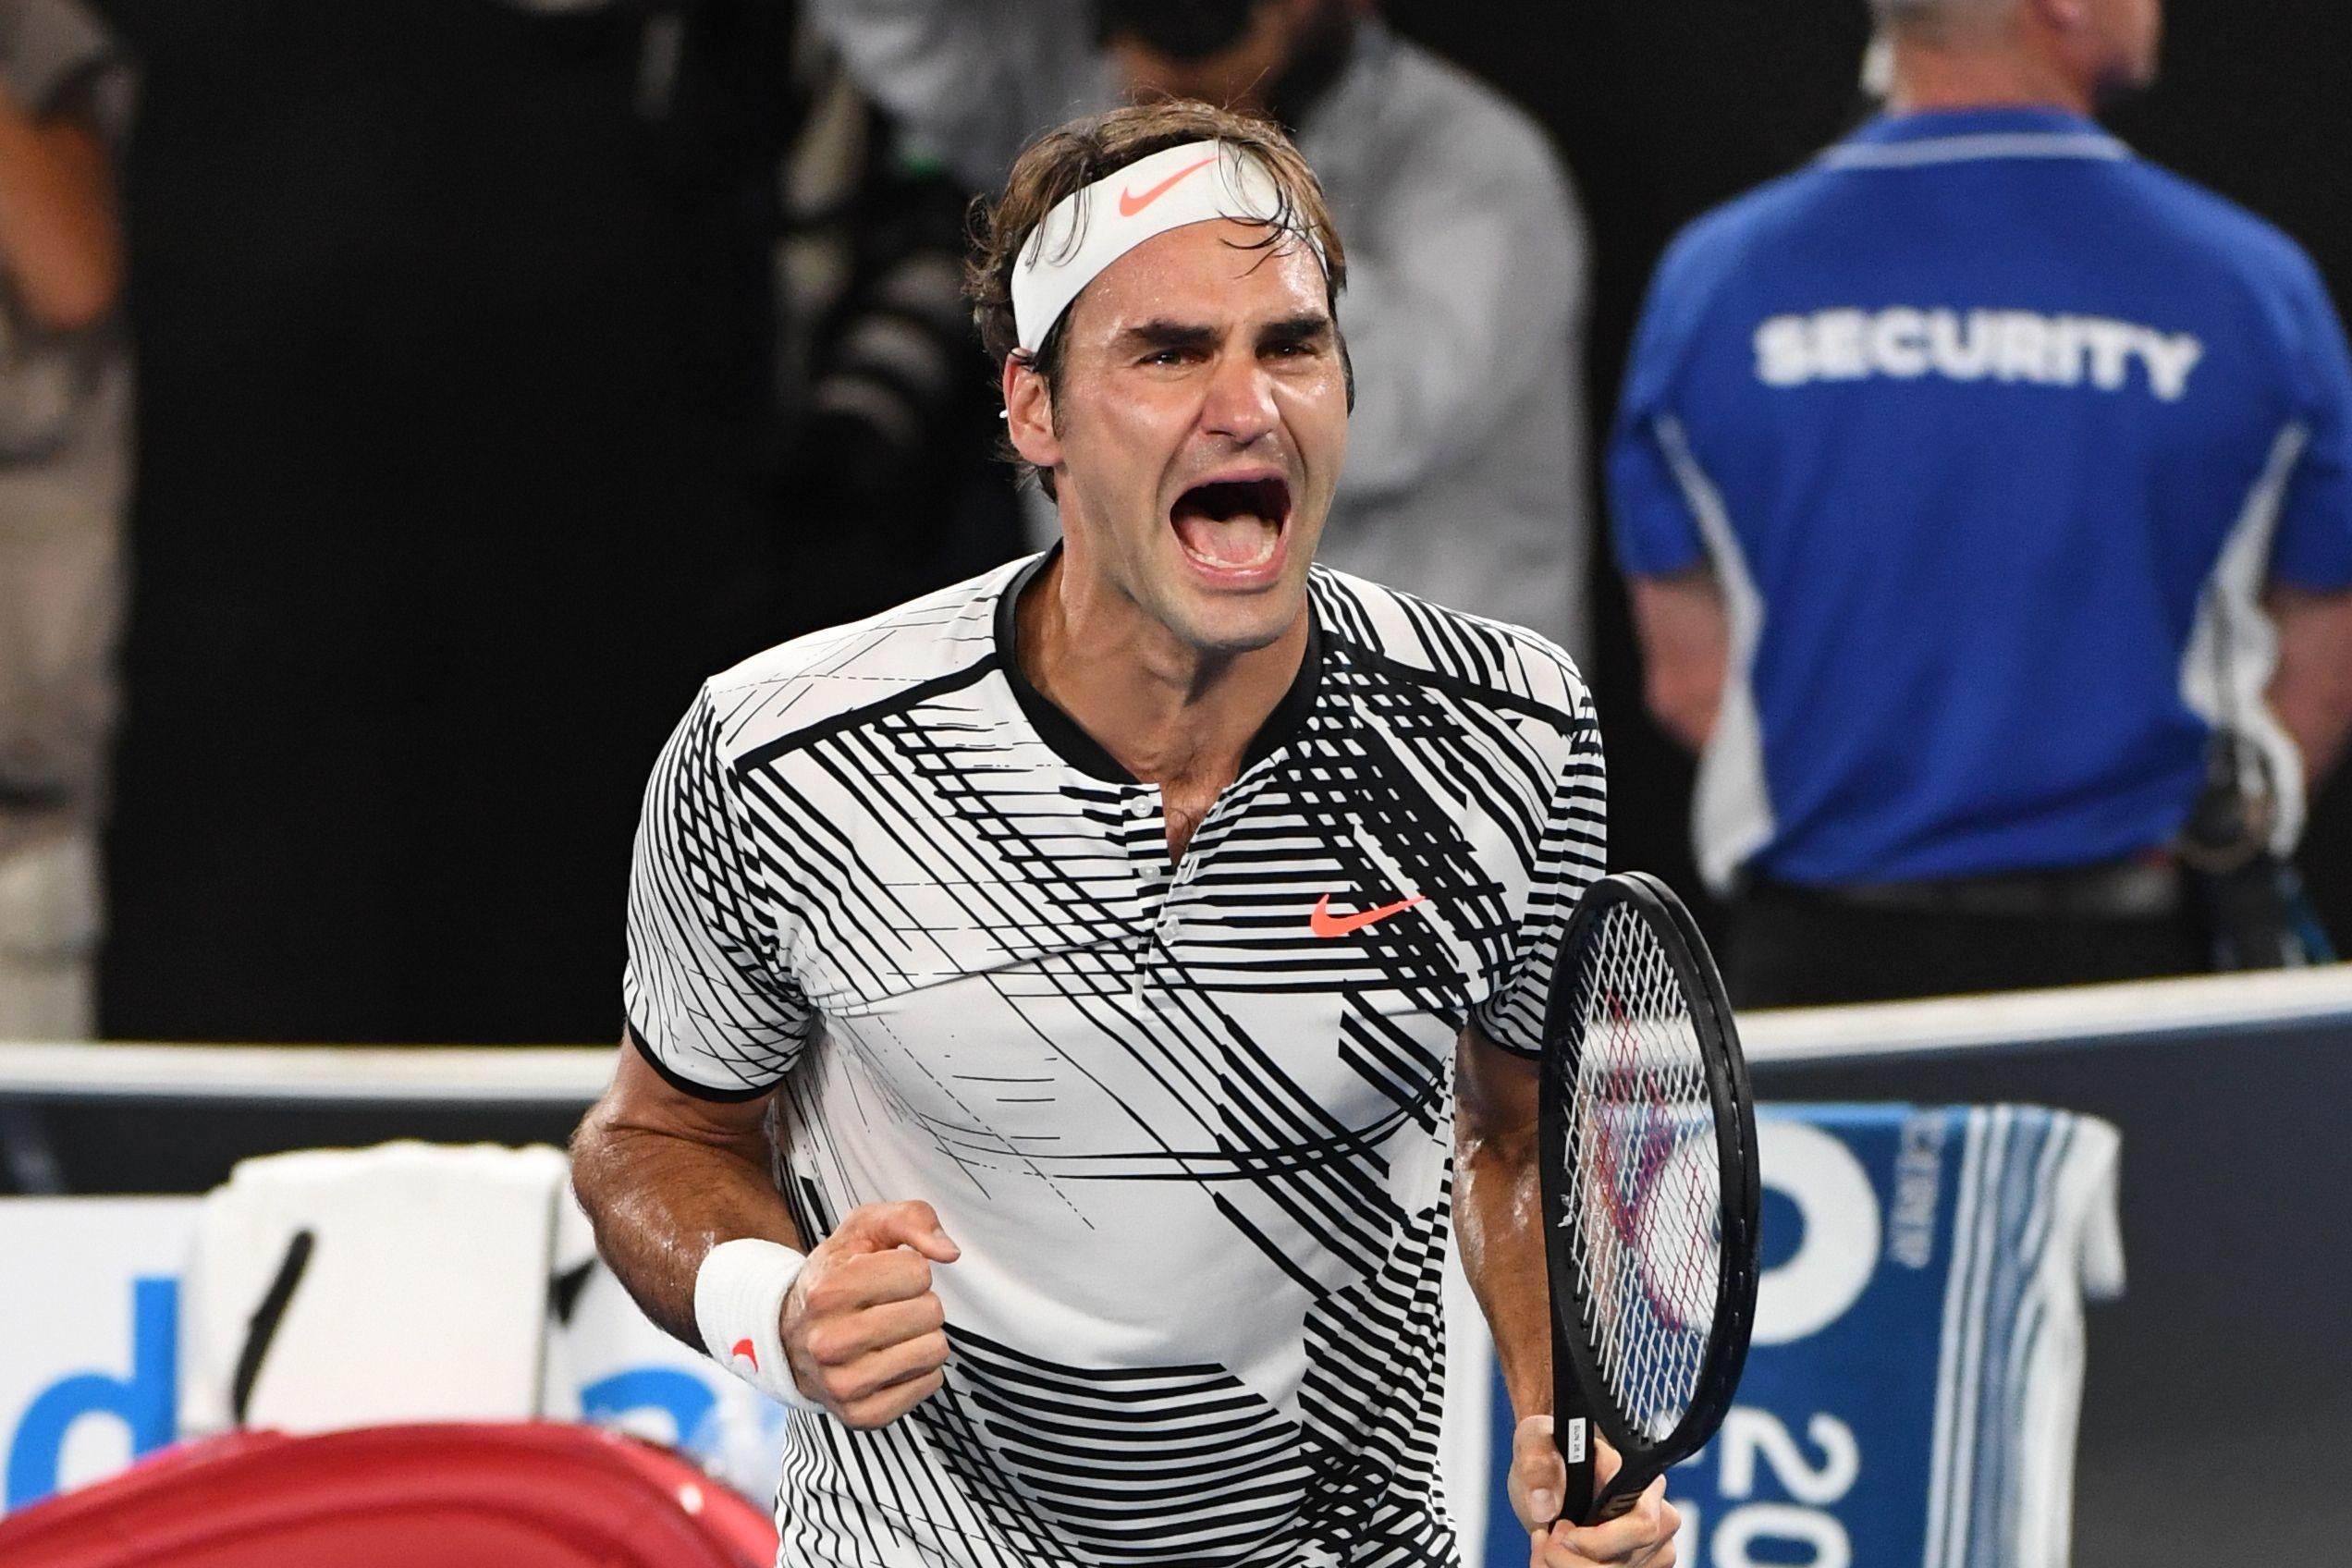 Fed pumps his fist and screams on court, racquet clutched in his left hand.